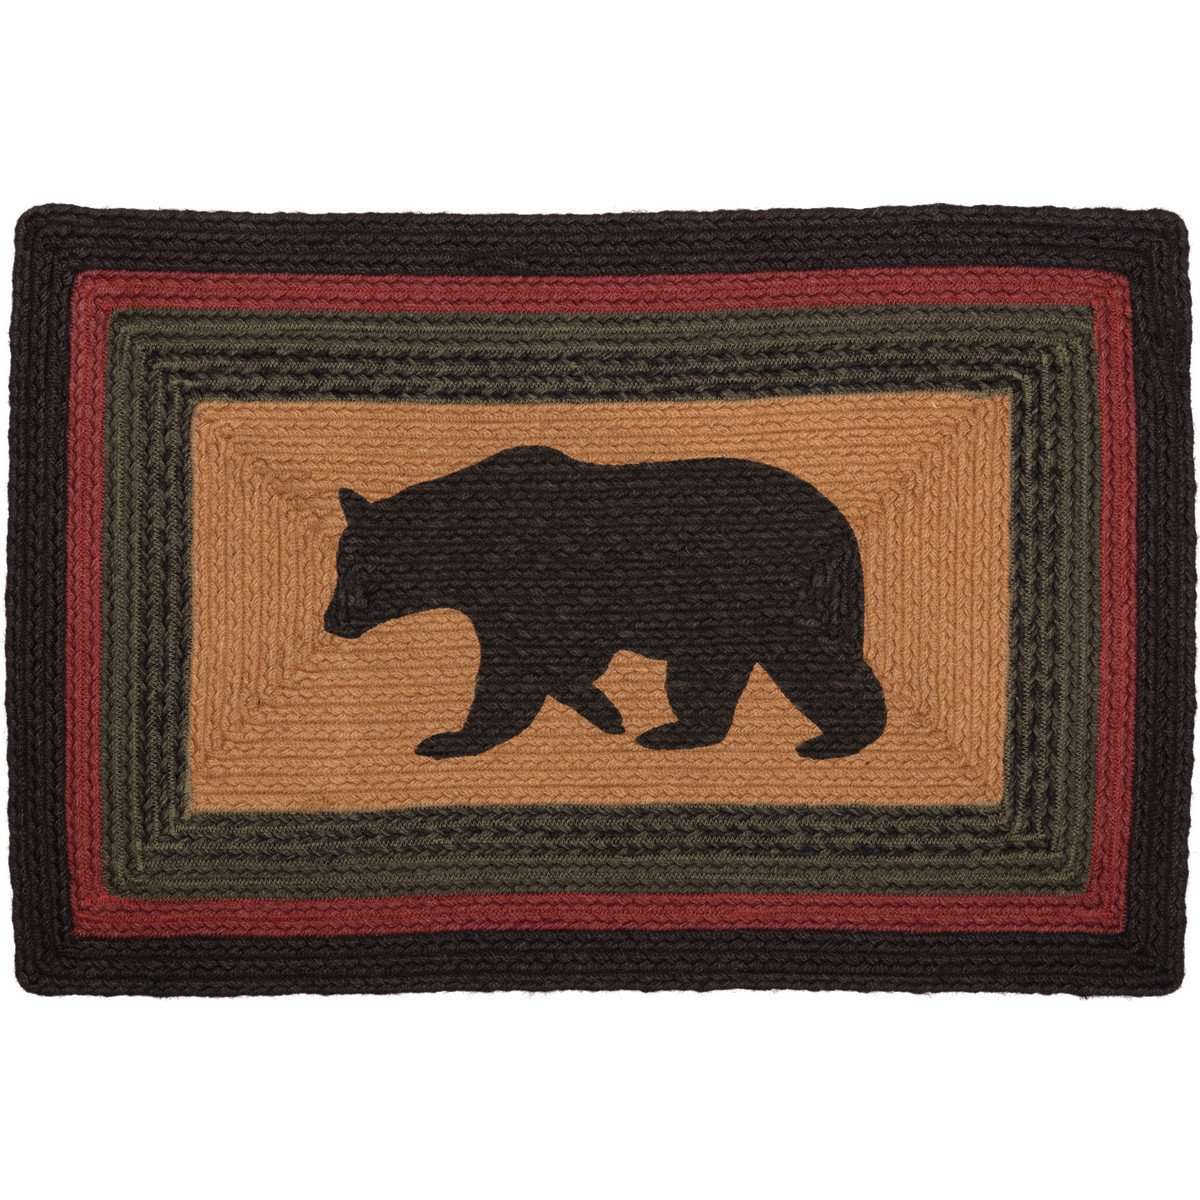 Wyatt Stenciled Bear Jute Braided Rug Oval/Rect rugs VHC Brands 20x30 inch Rect 